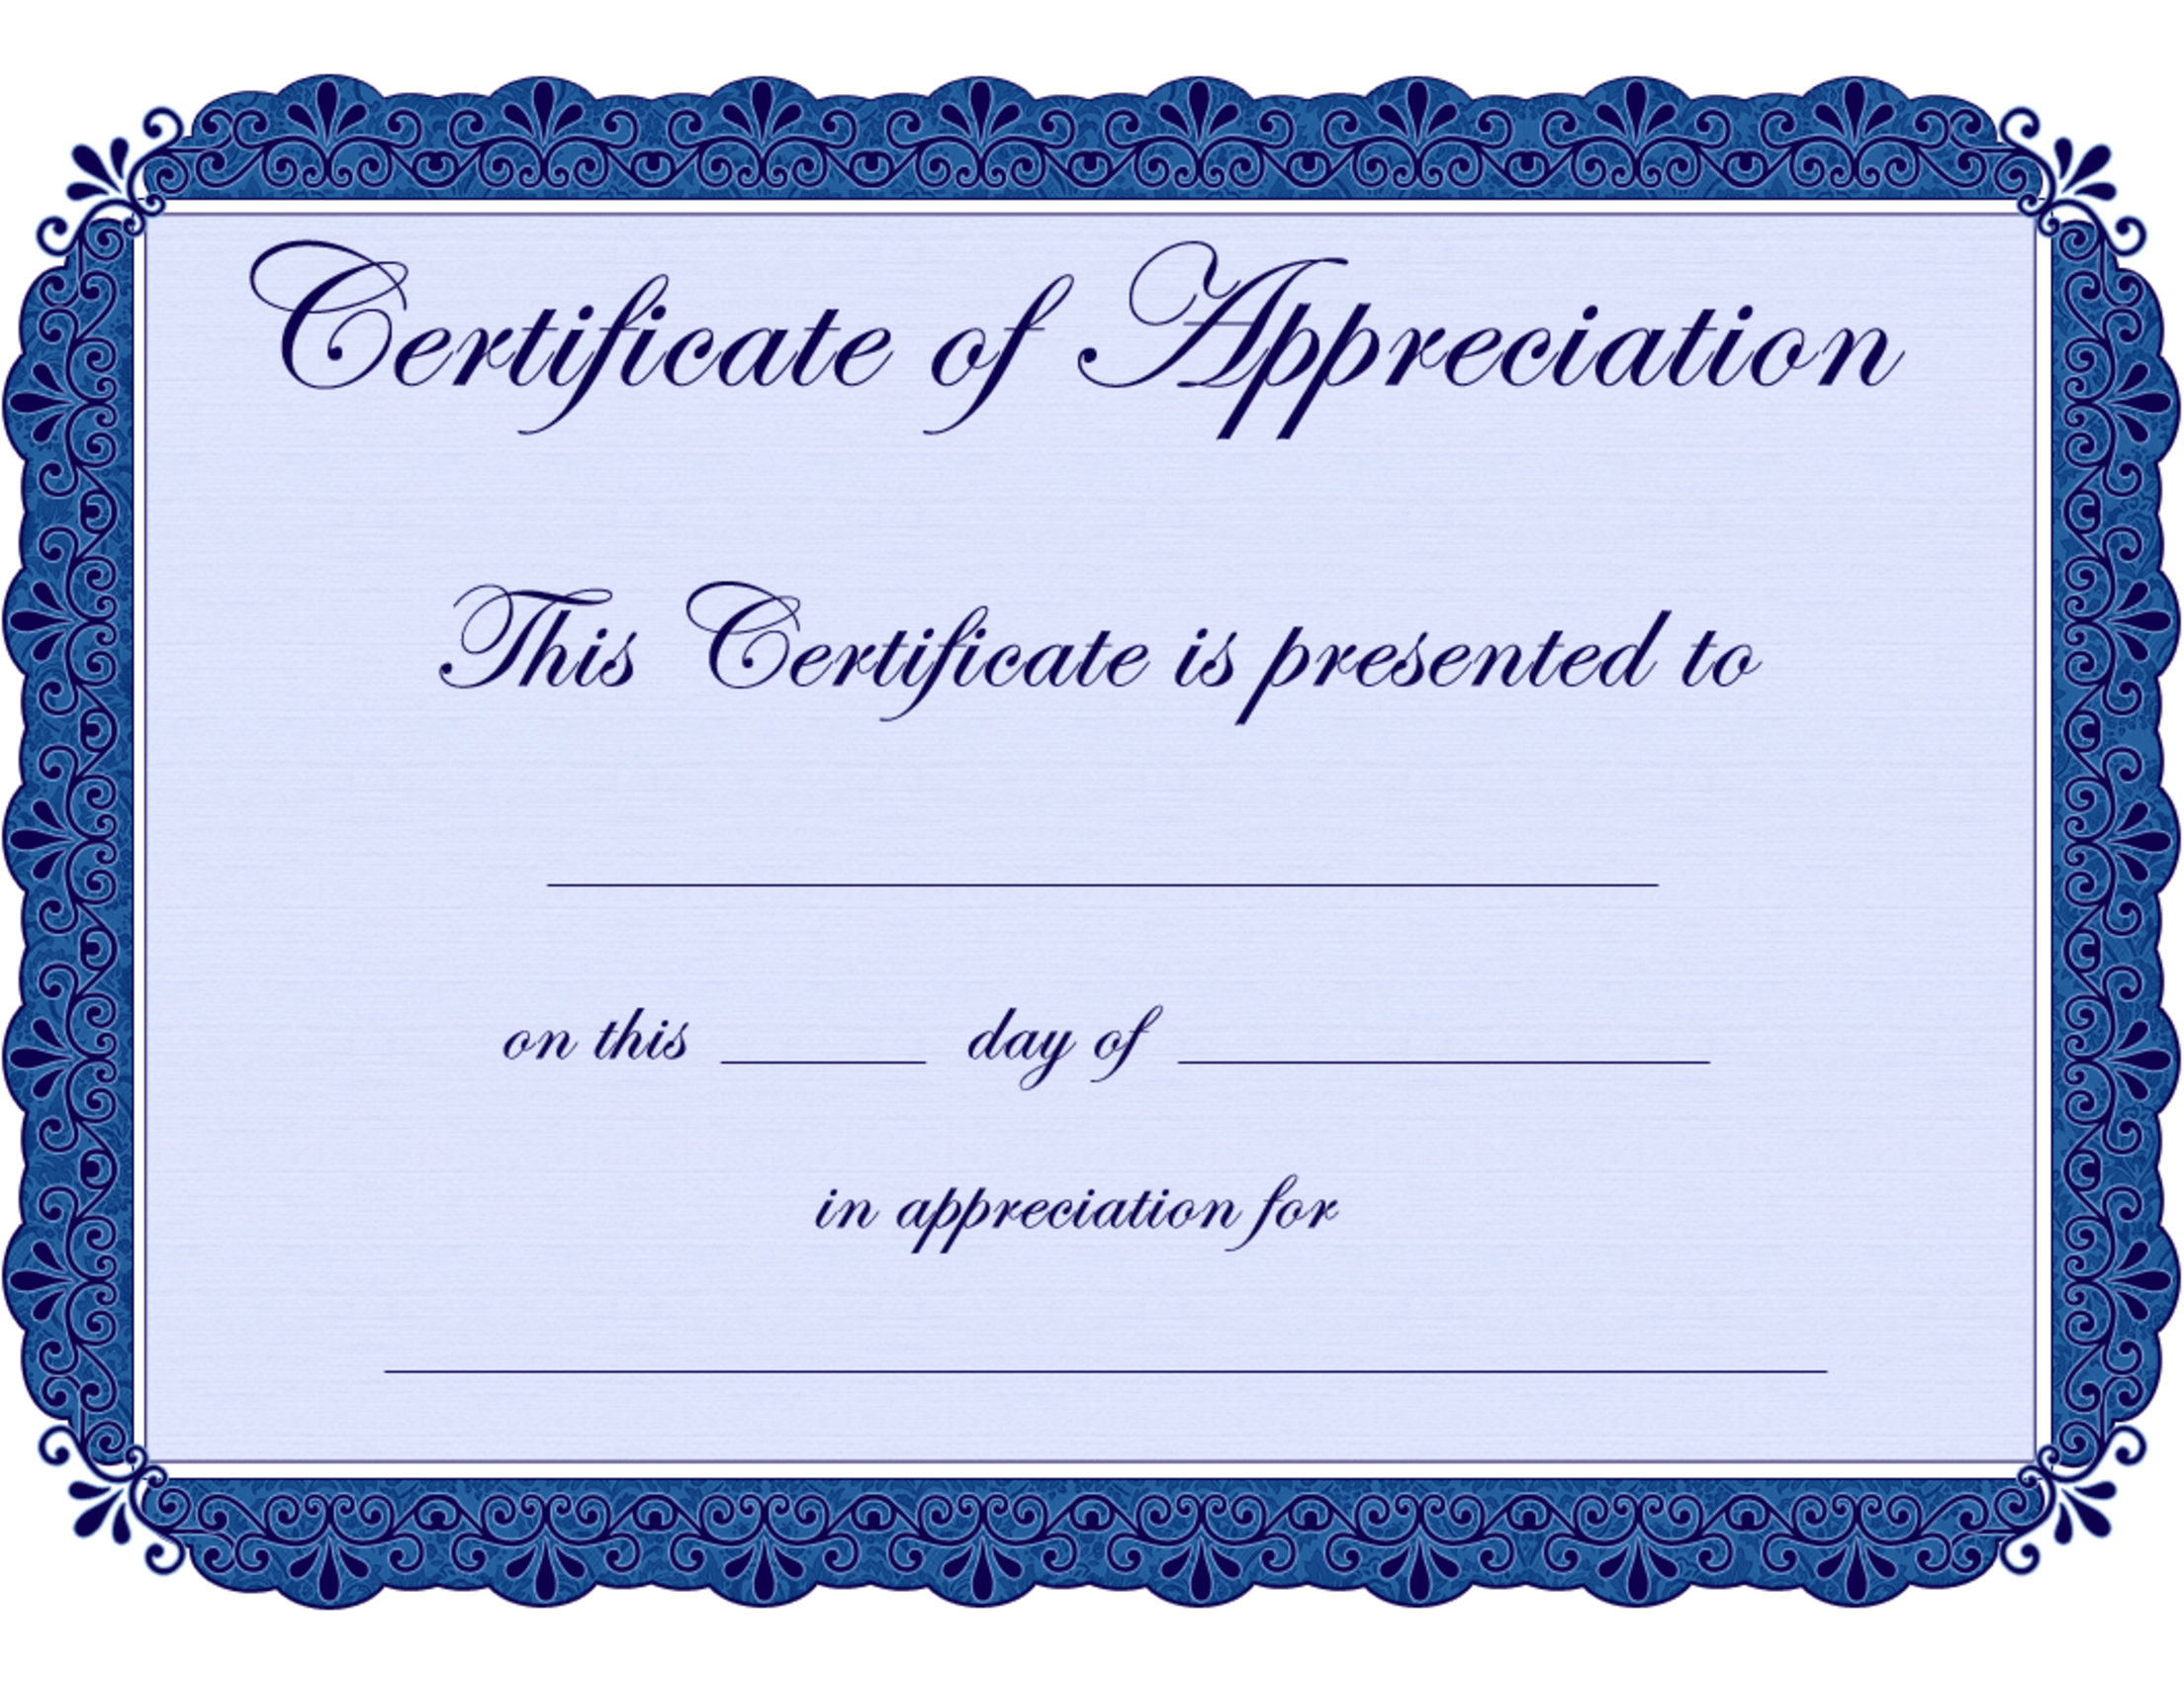 Free Printable Certificates Certificate Of Appreciation Intended For Printable Certificate Of Recognition Templates Free